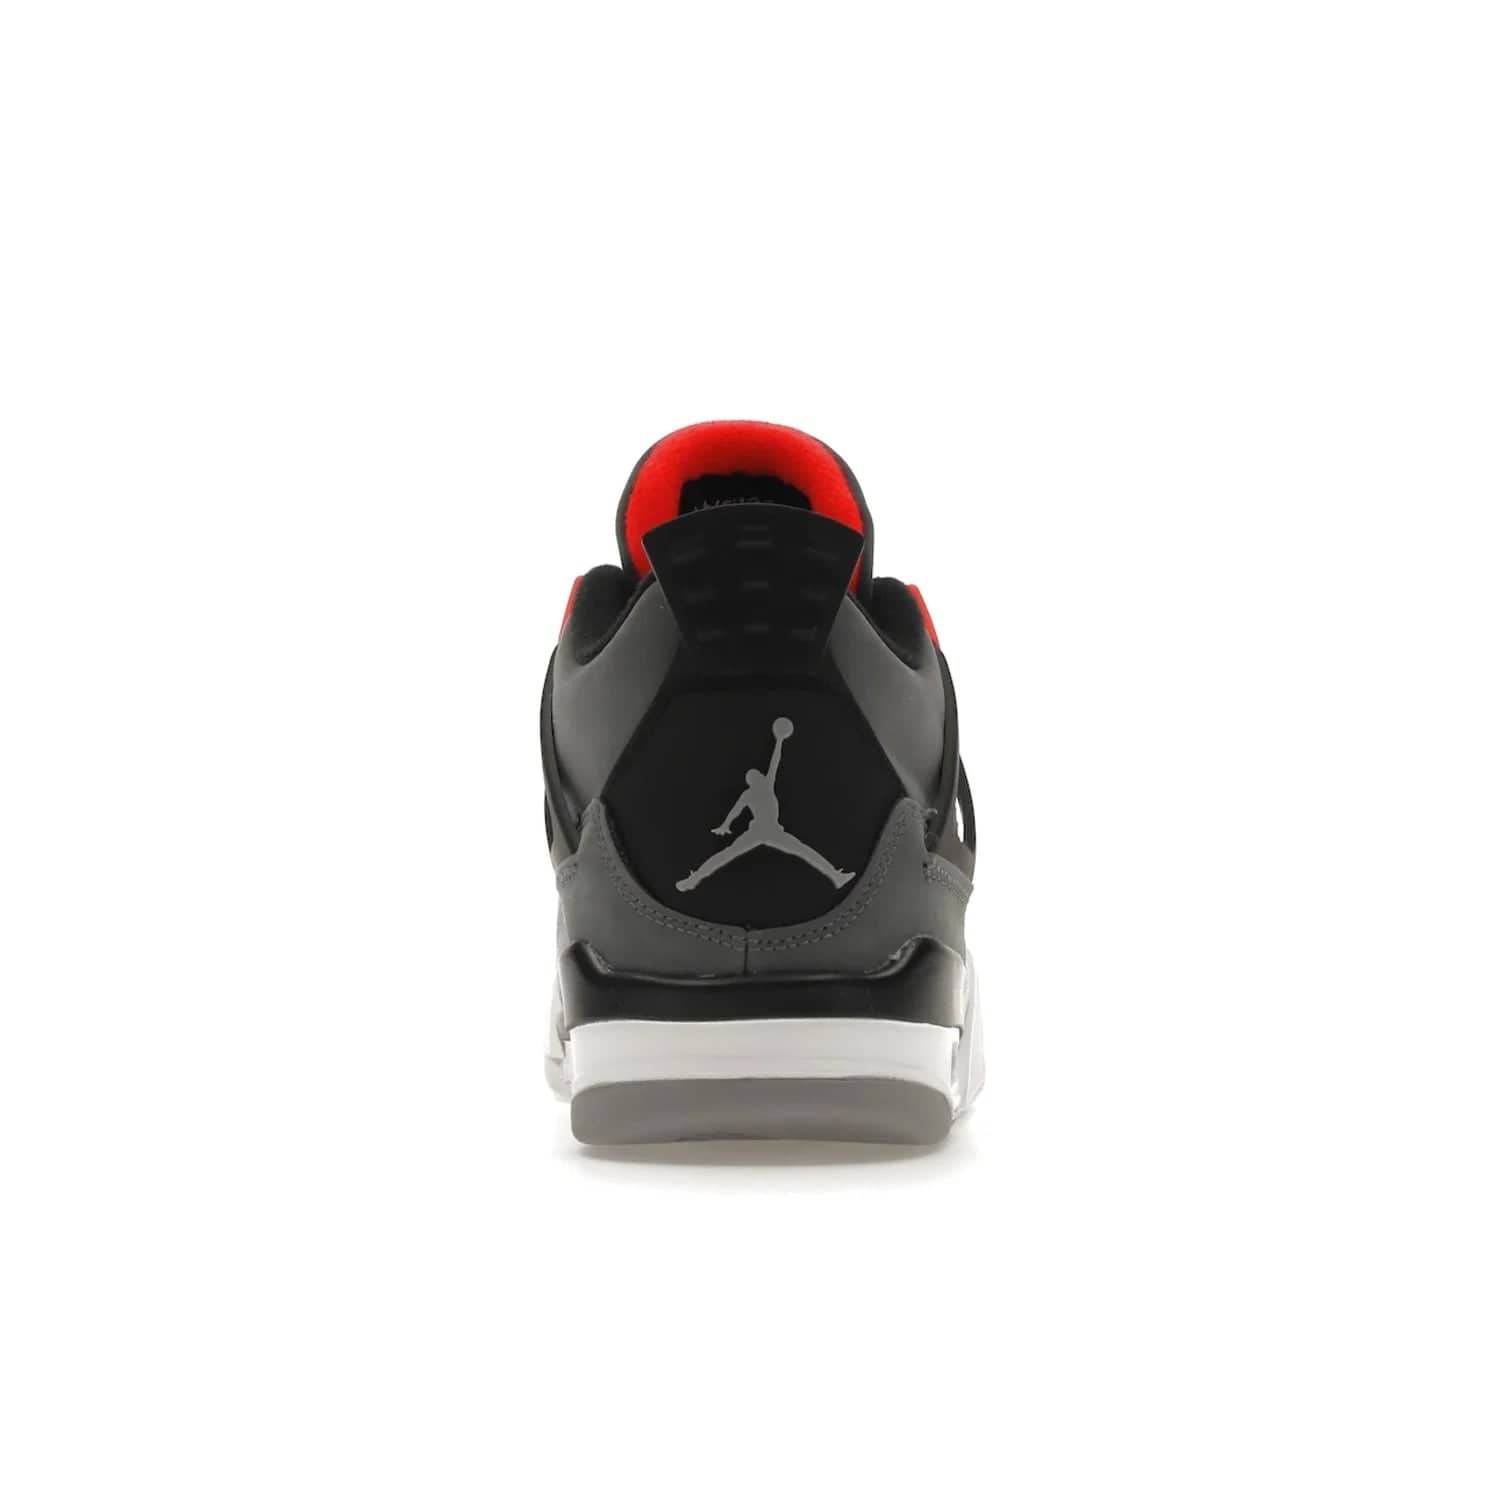 Jordan 4 Retro Infrared (GS) - Image 28 - Only at www.BallersClubKickz.com - Shop the Air Jordan 4 Retro Infrared (GS) for a classic silhouette with subtle yet bold features. Dark grey nubuck upper with lighter forefoot overlay, black accents, Infrared molded eyelets & woven tongue tag. Available June 2022.